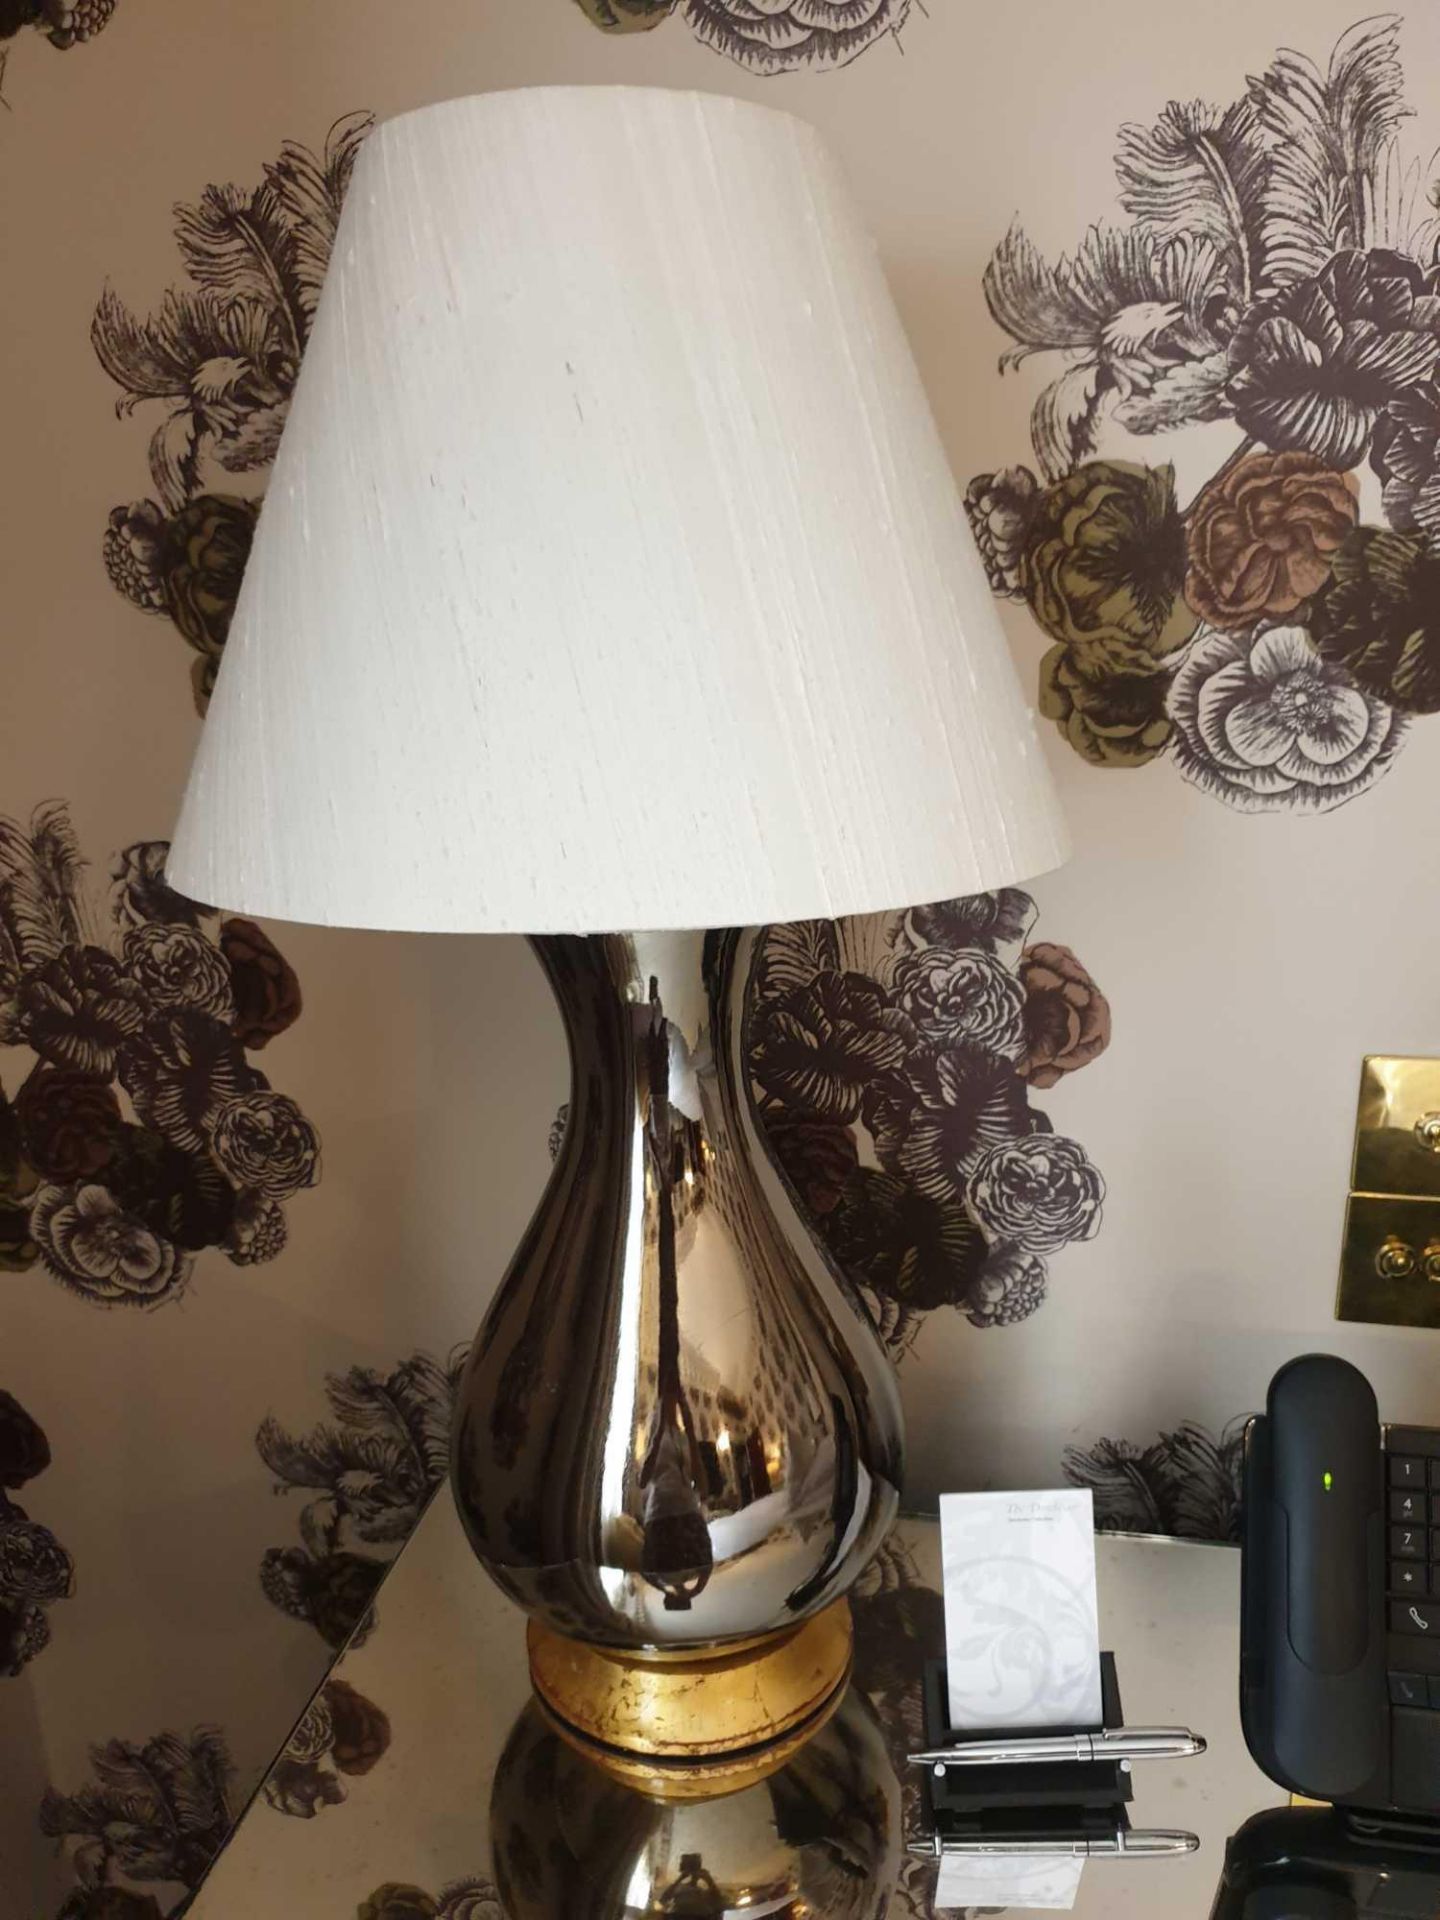 A Pair Of Heathfield And Co Louisa Glazed Ceramic Table Lamp With Textured Shade 77cm (Room 129) - Image 2 of 2